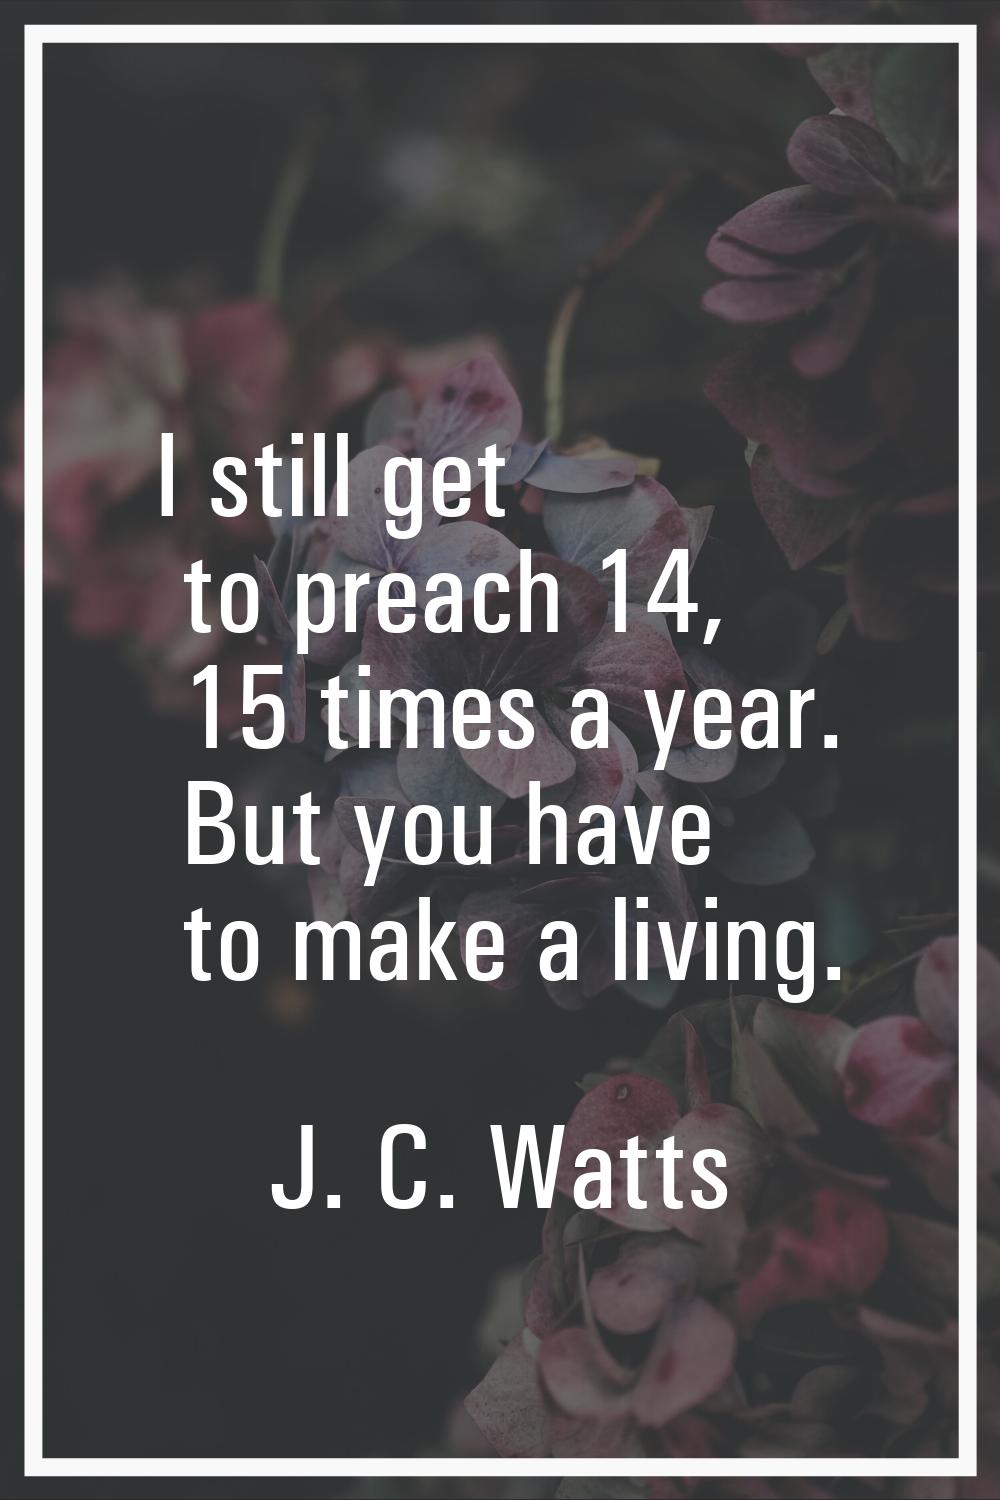 I still get to preach 14, 15 times a year. But you have to make a living.